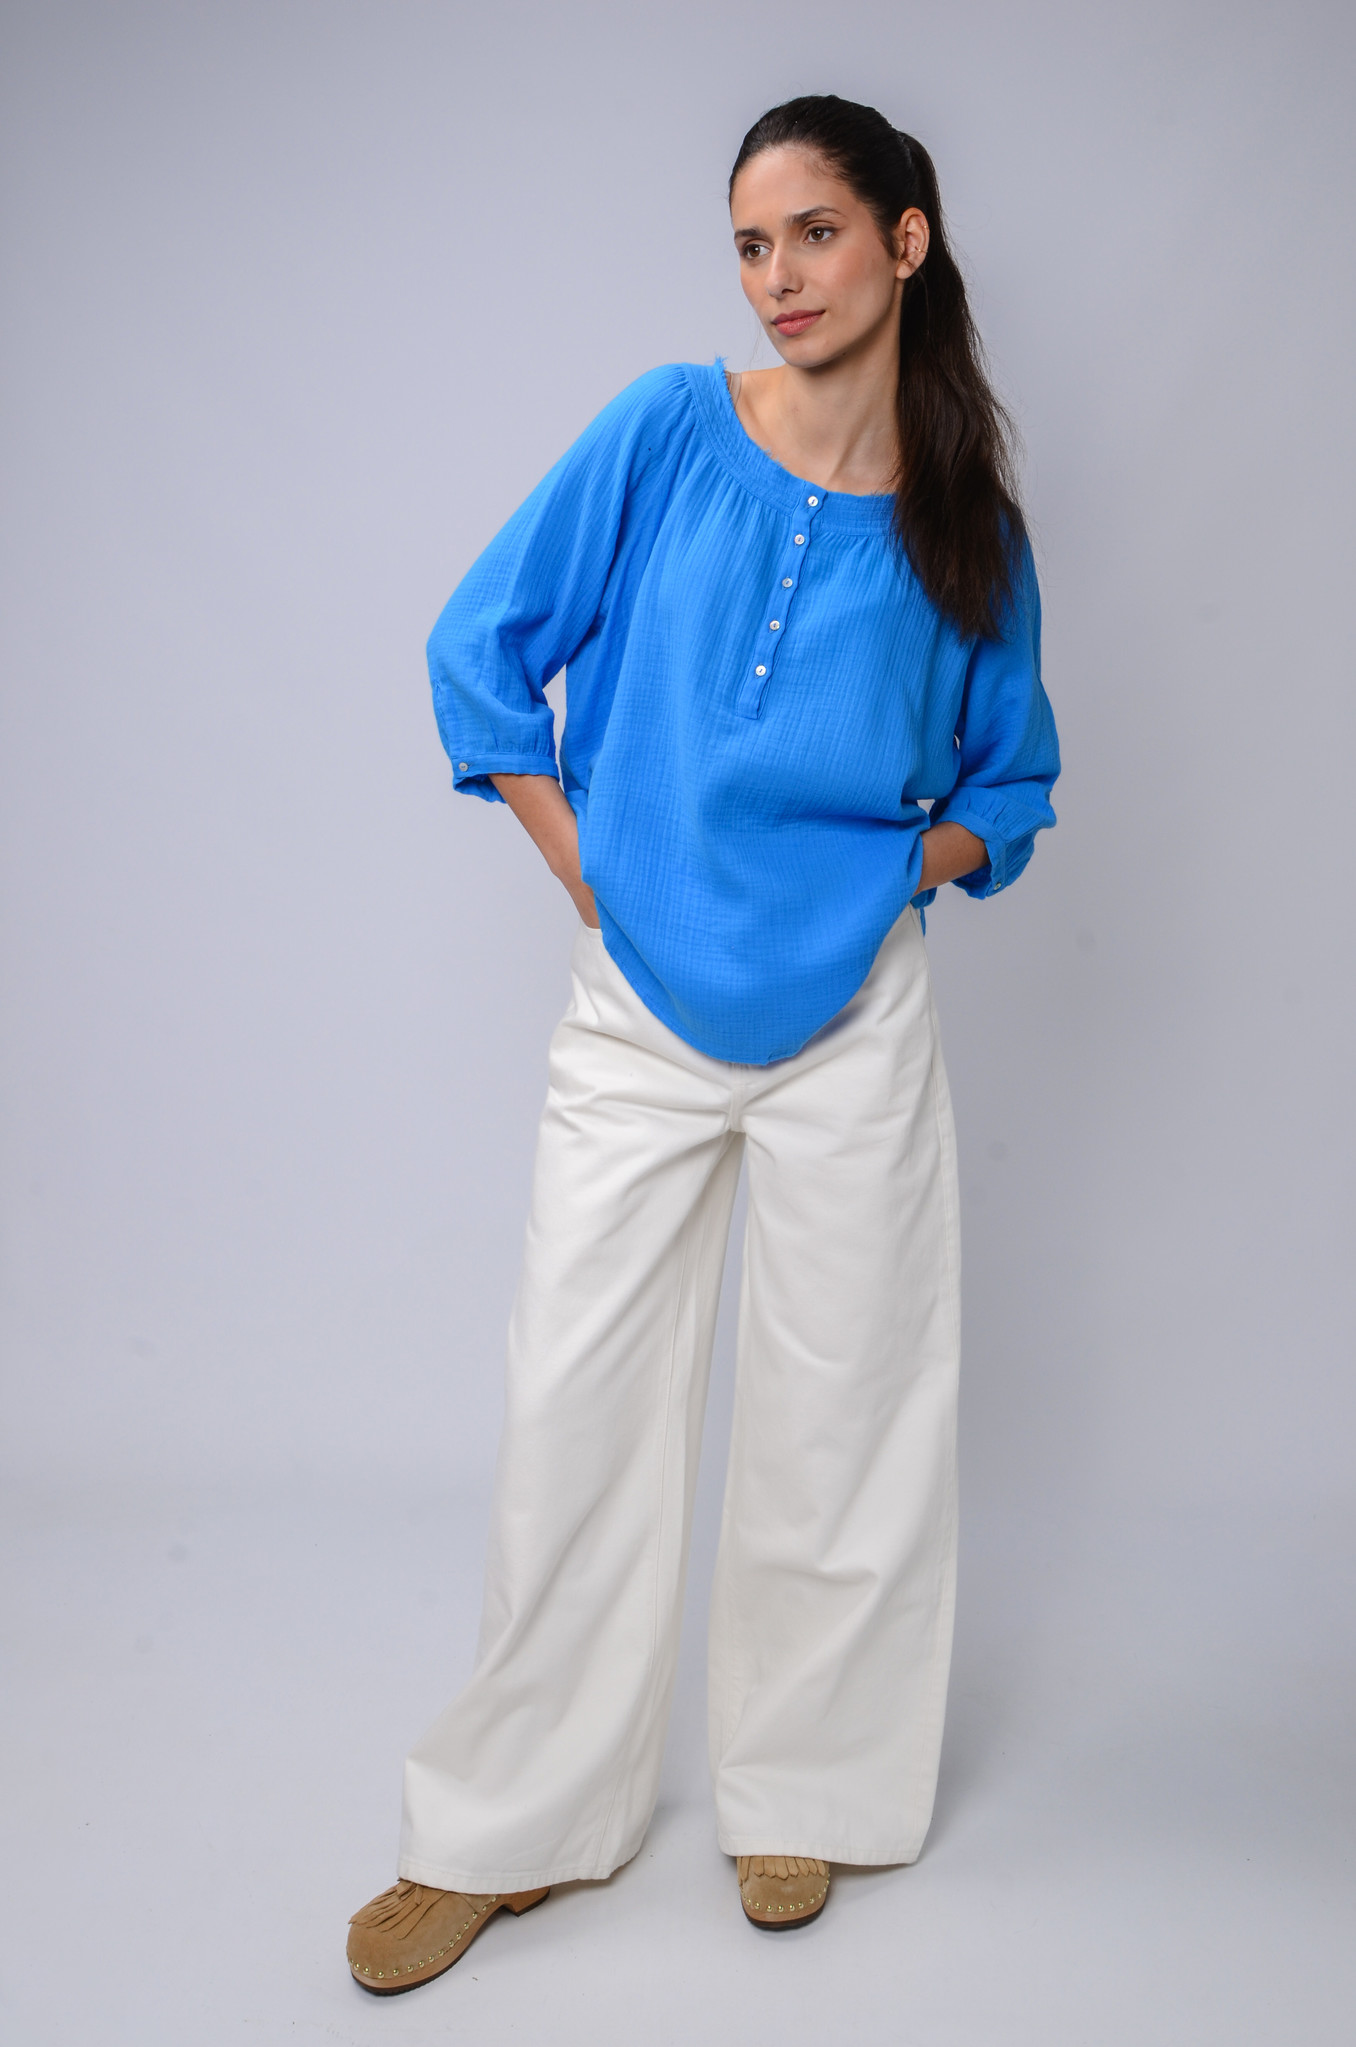 EMILIE SHIRT IN TURQUOISE-2